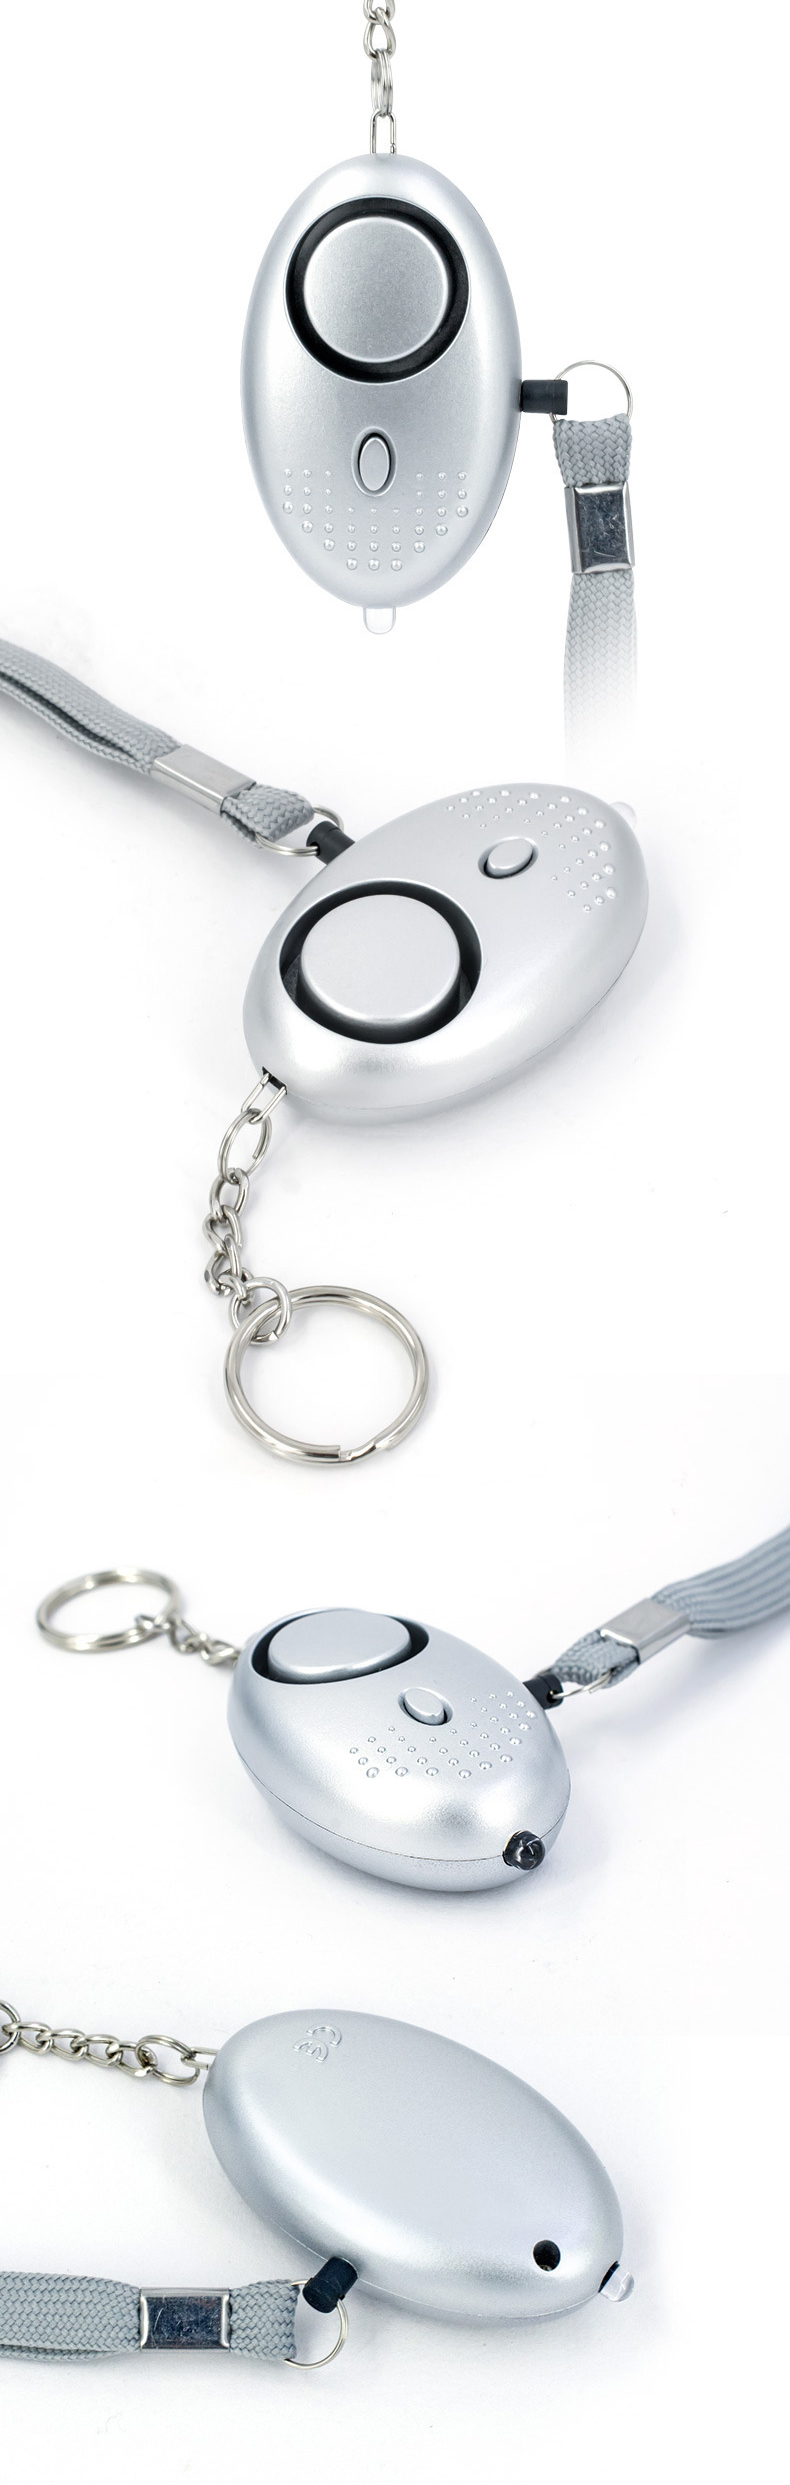 Bakeey-130db-Safesound-Emergency-Personal-Security-Alarm-Keychain-with-LED-Lights-Women-Kids-Elder-E-1843420-8